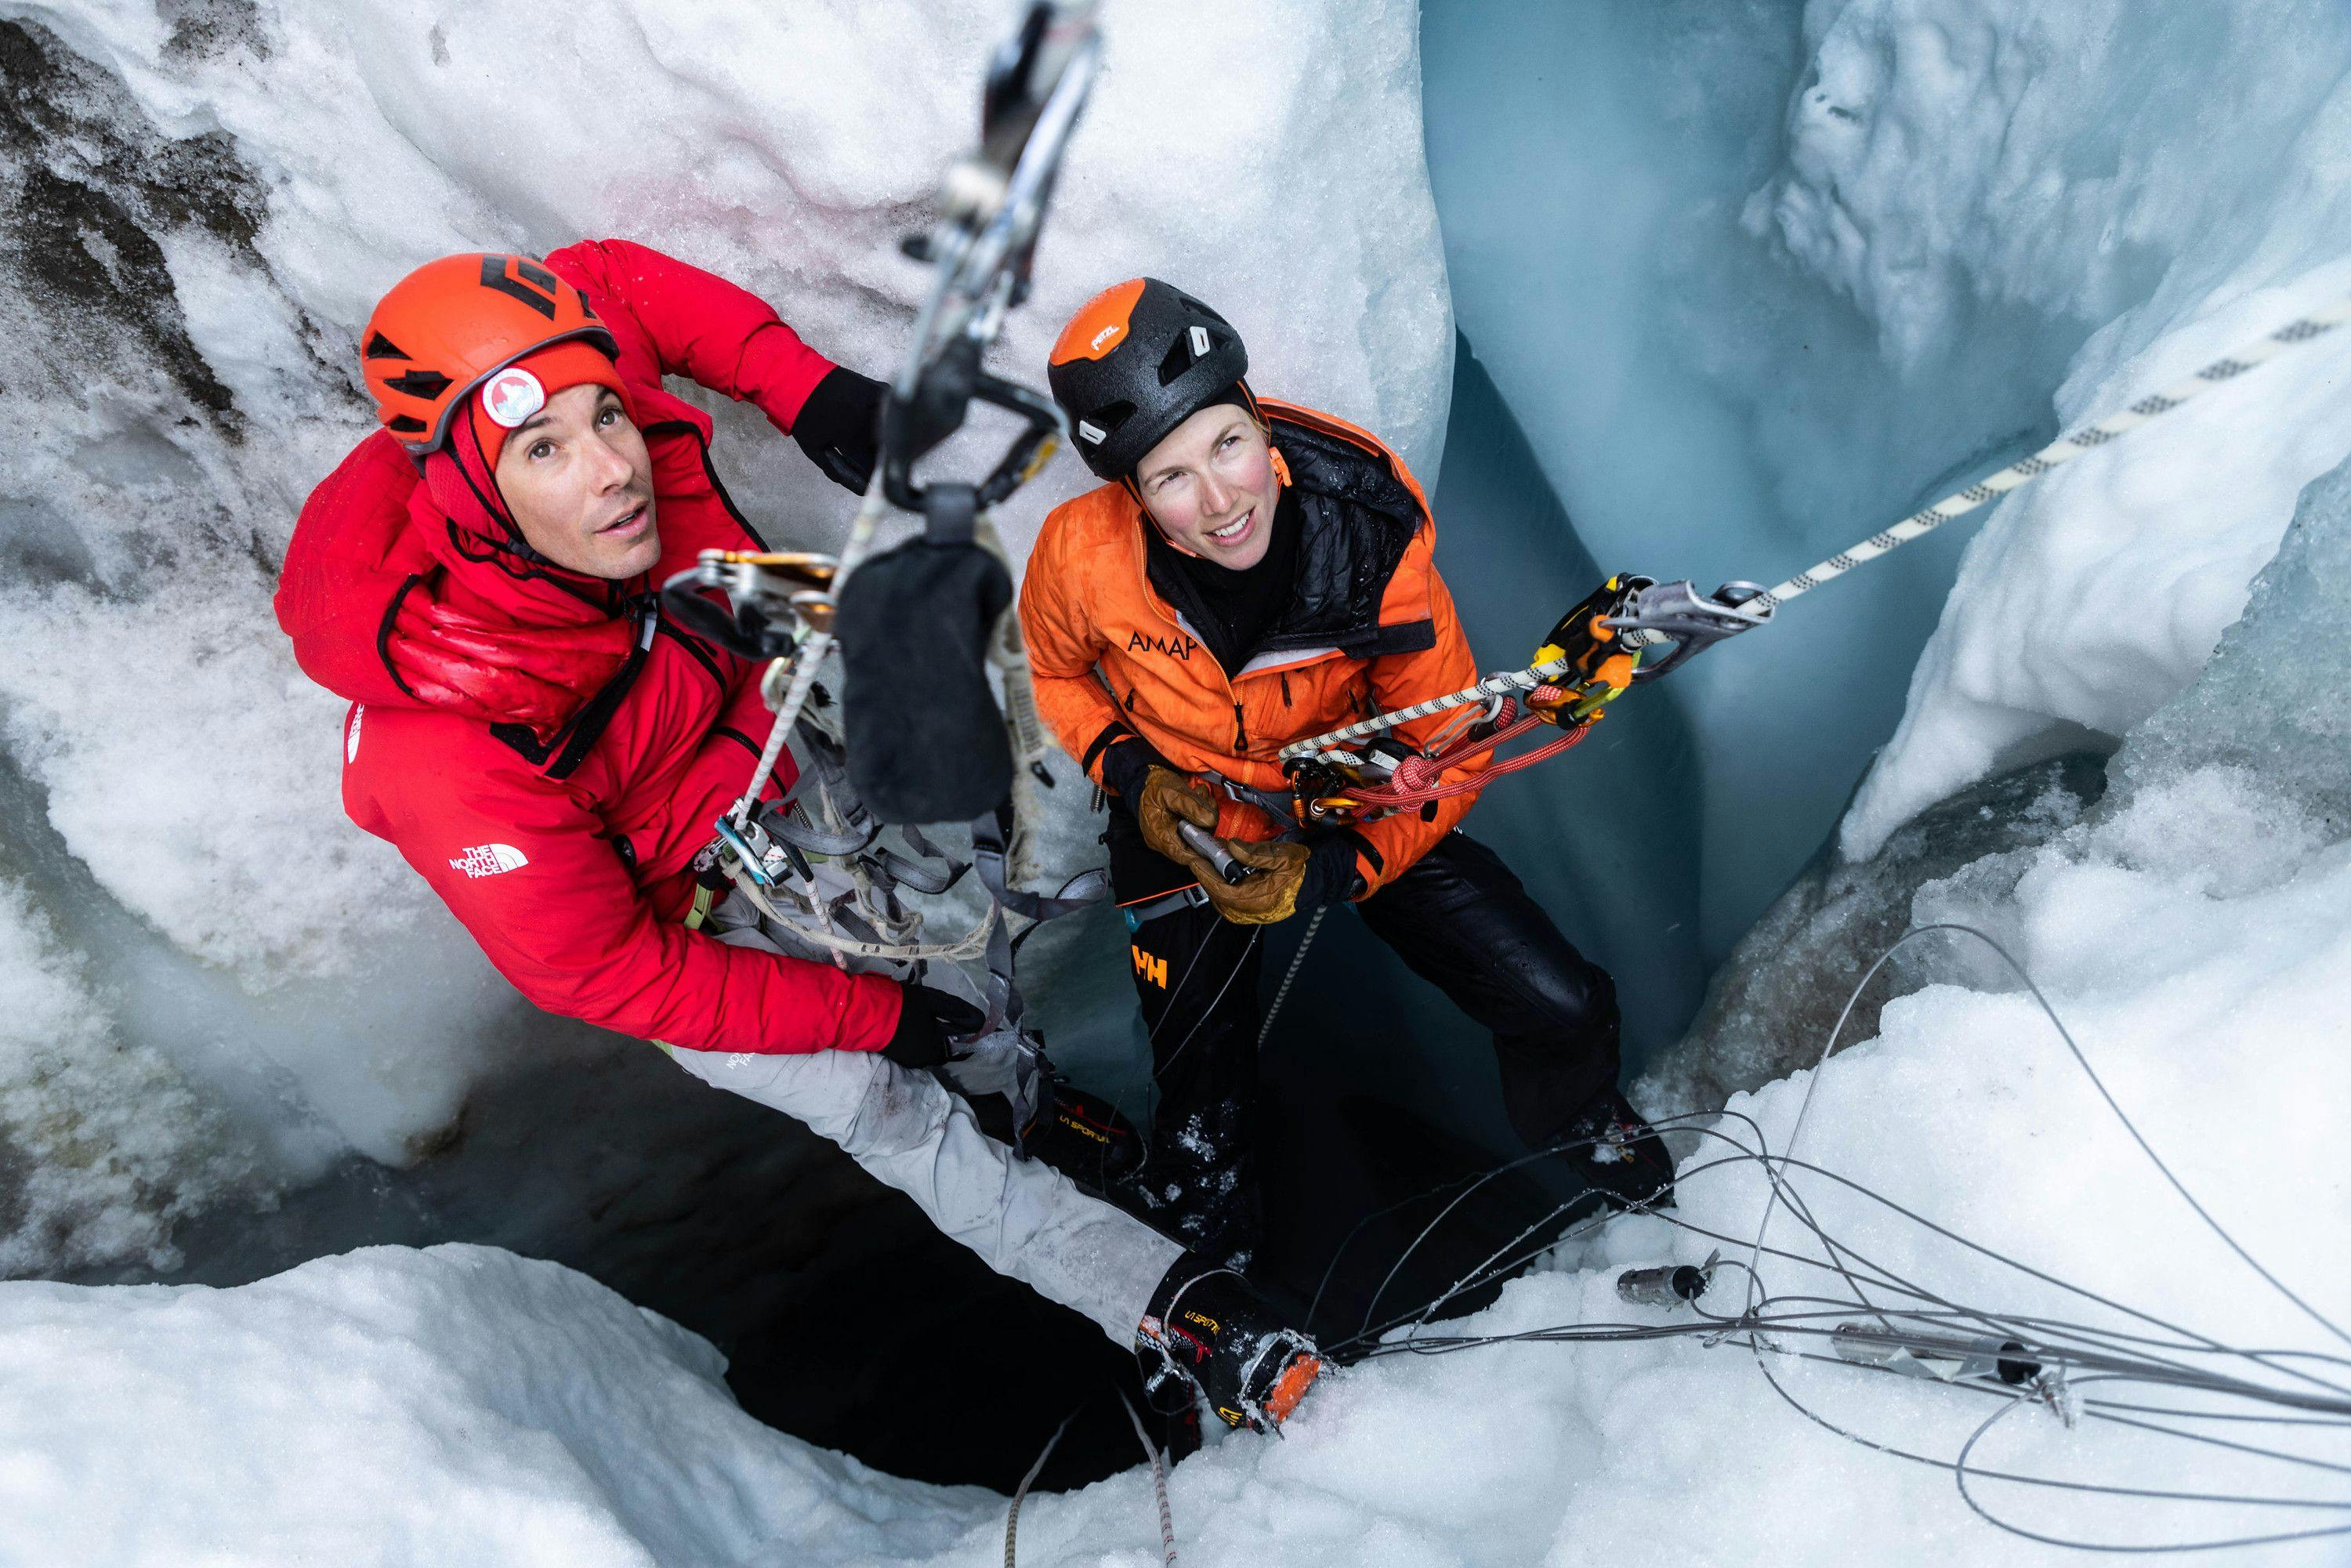 Arctic Ascent with Alex Honnold, National Geographic, TV PR camping, MCPR, Mark Collins PR